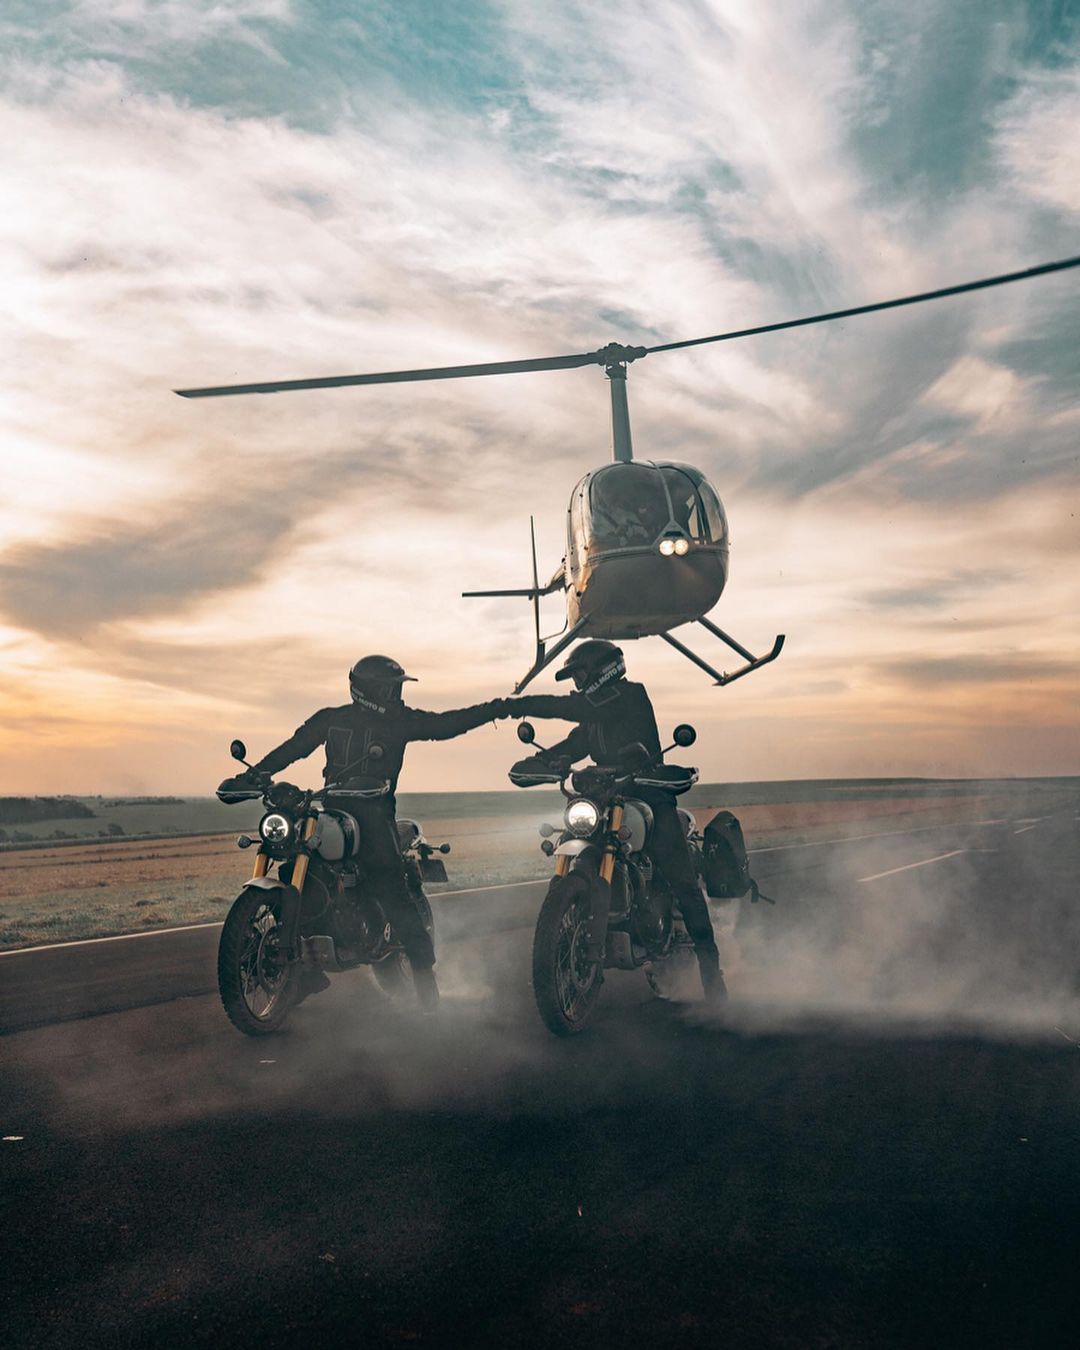 Two motorcycles on the road next to a helicopter.